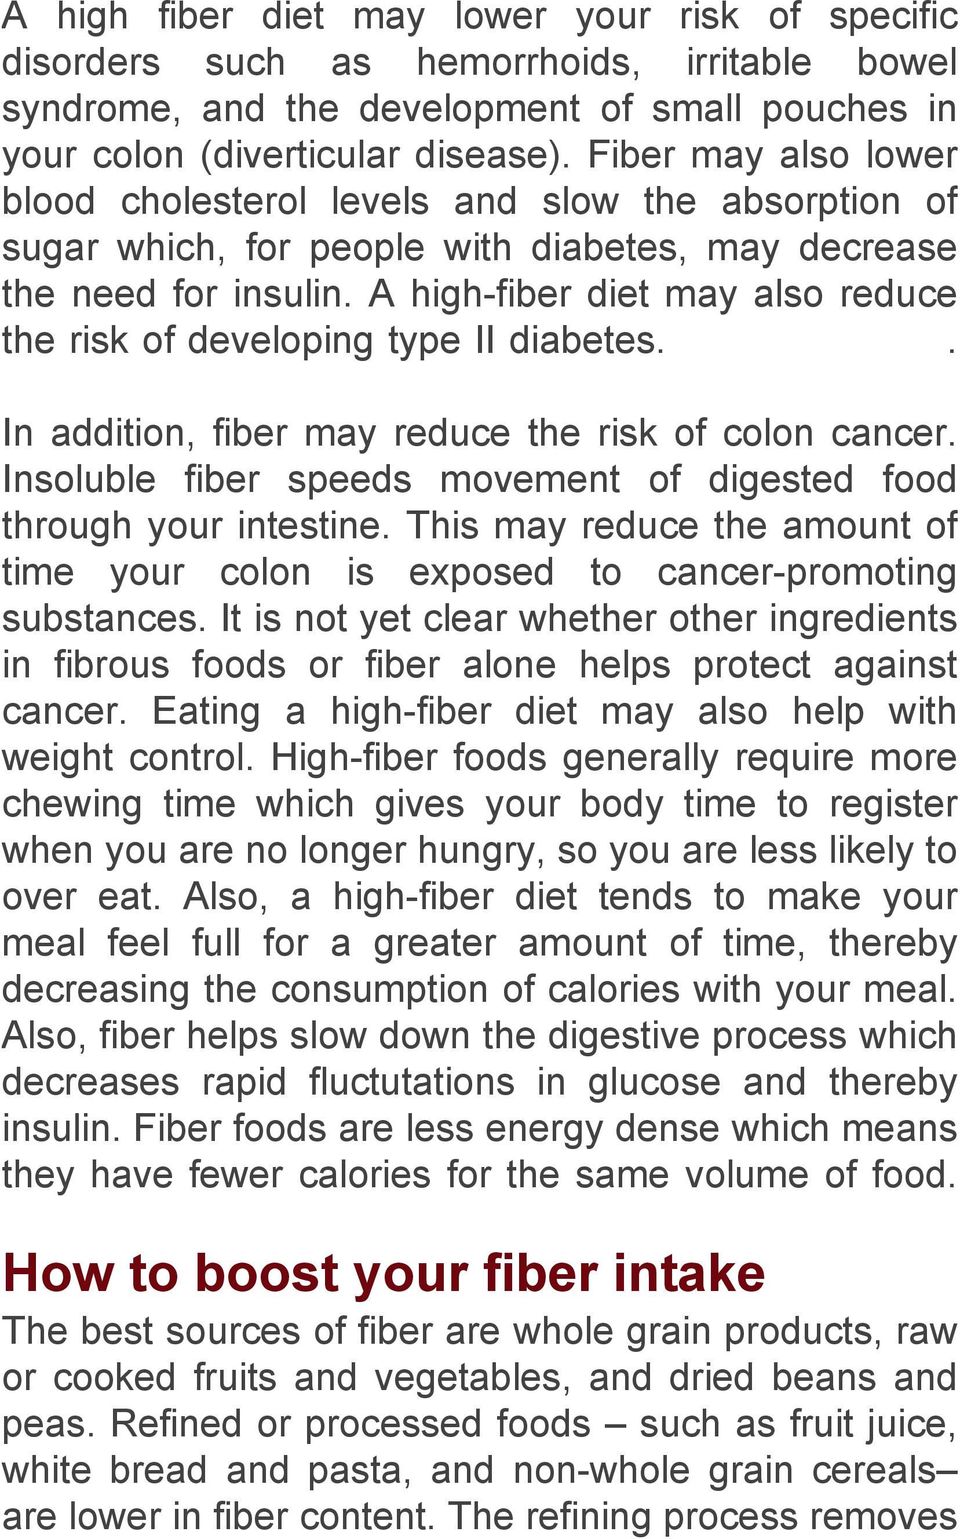 A high-fiber diet may also reduce the risk of developing type II diabetes.. In addition, fiber may reduce the risk of colon cancer.